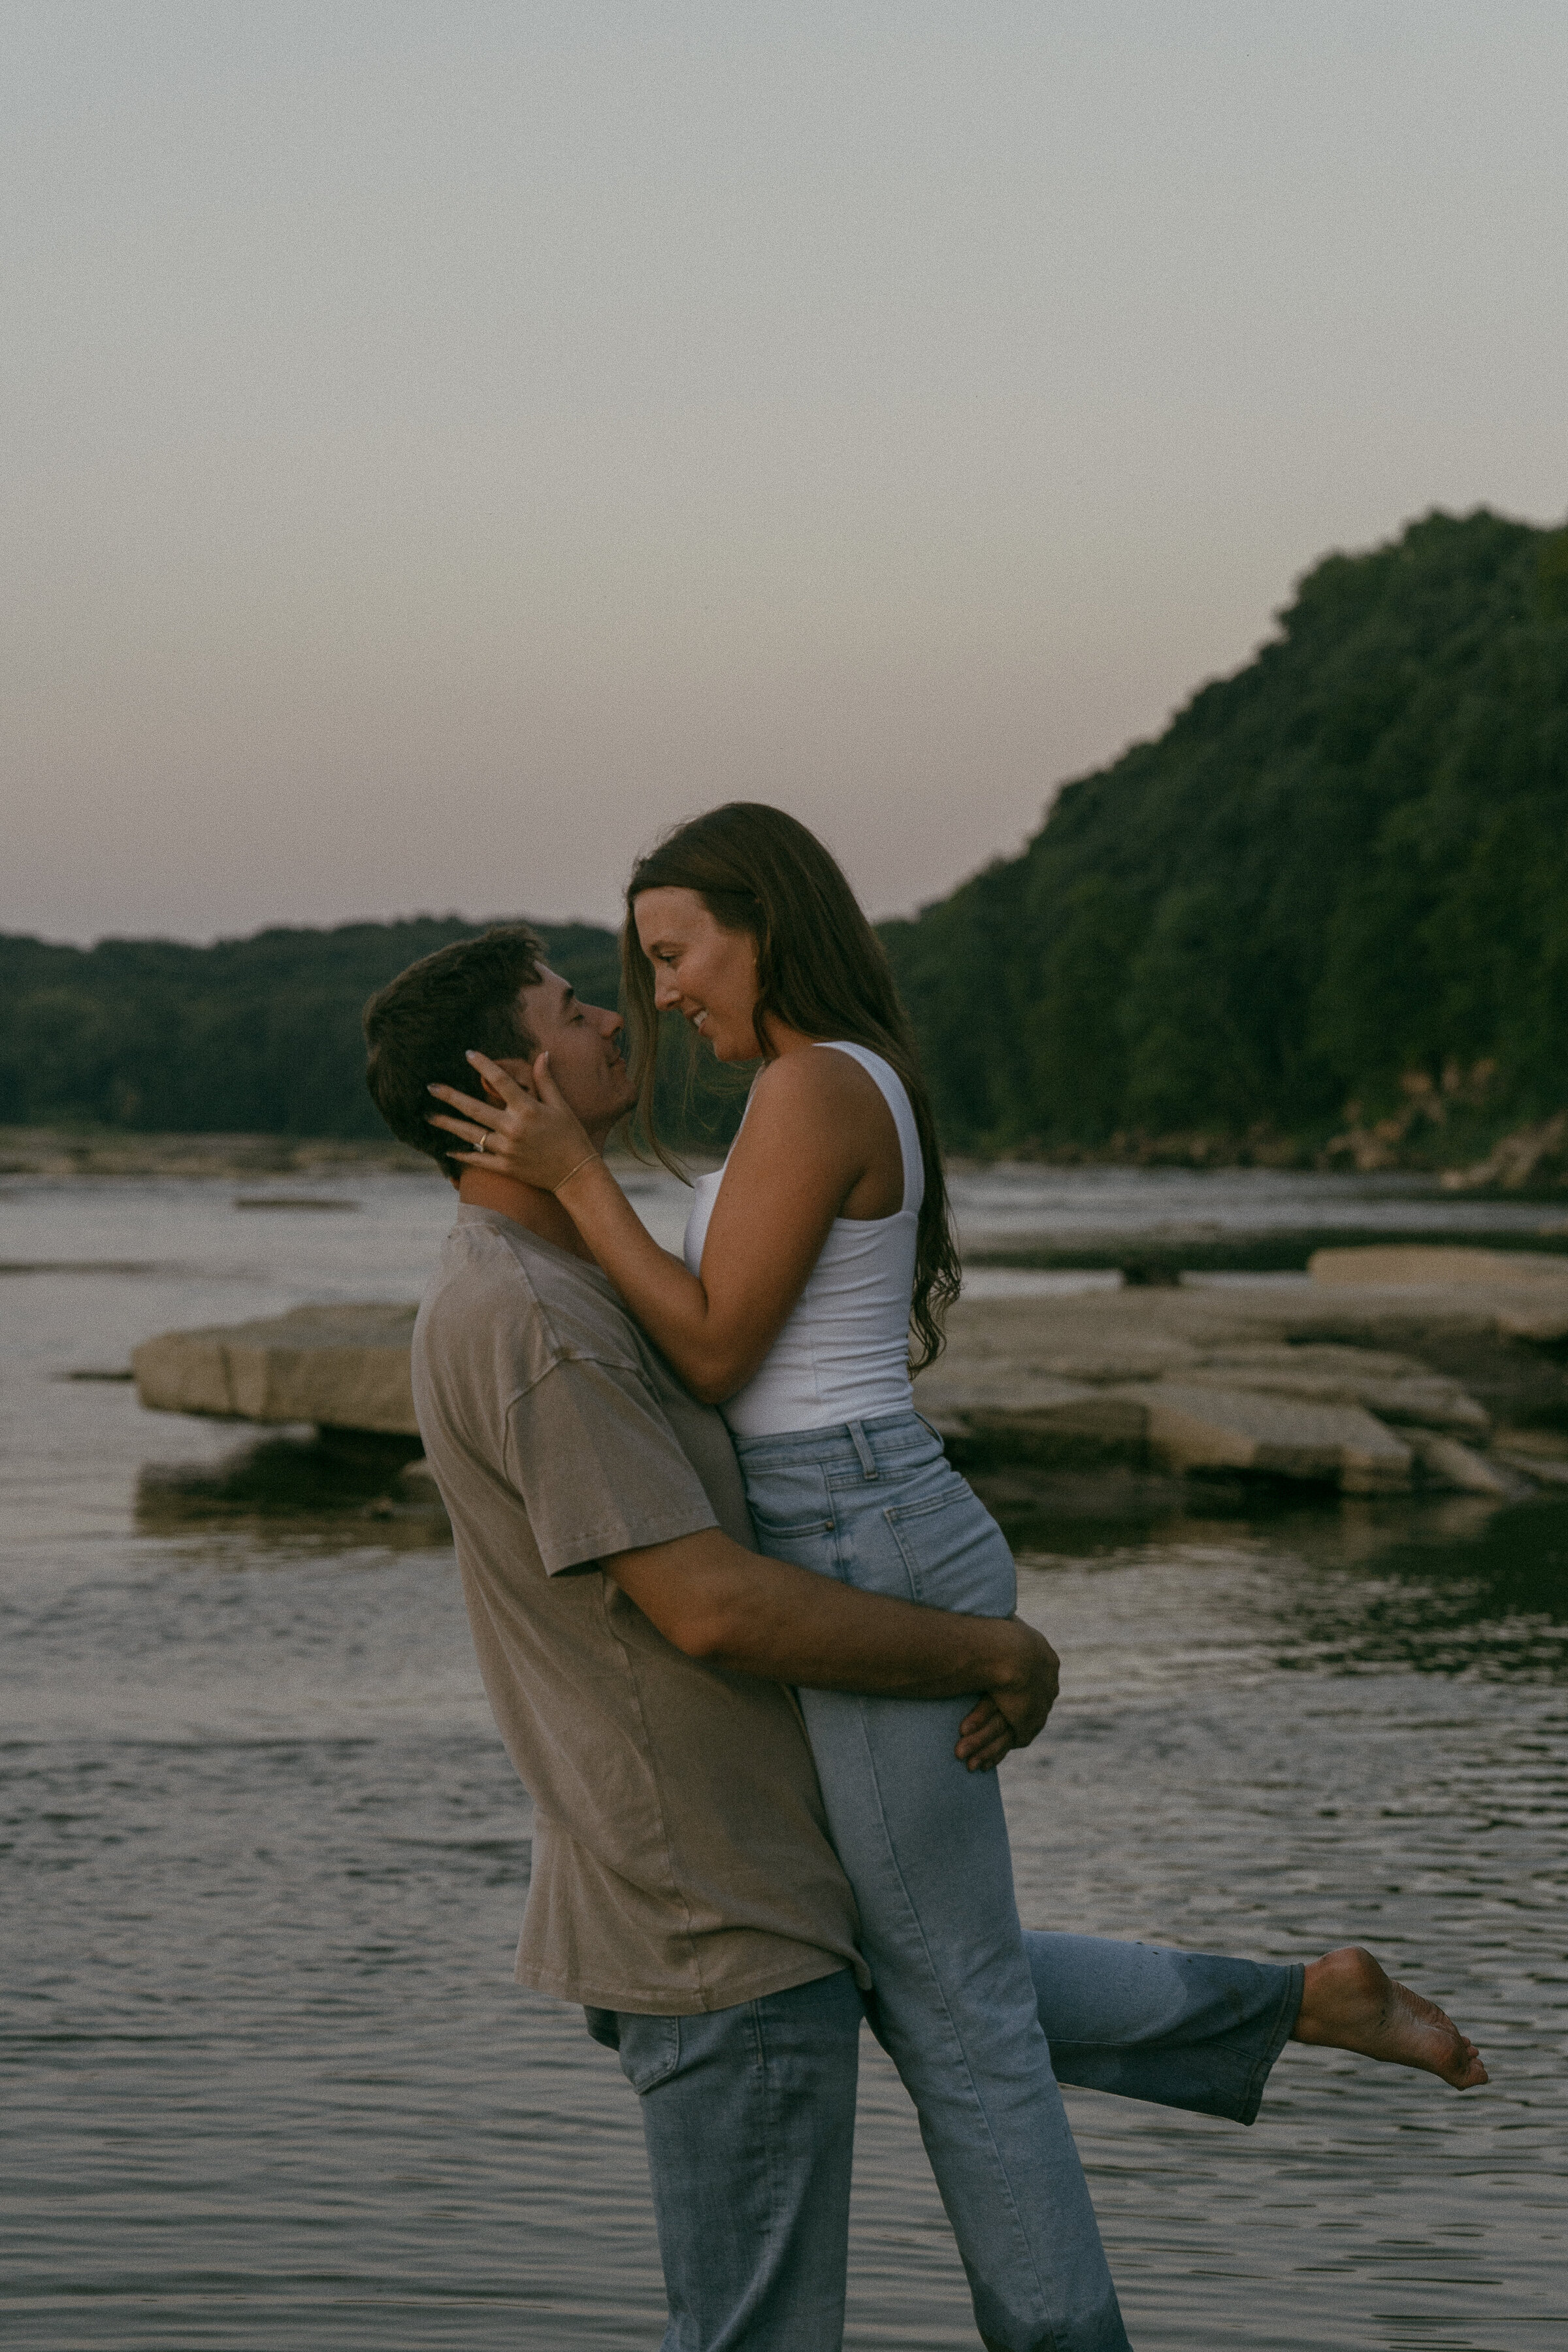 Couple embracing on a rocky riverbank at dusk.